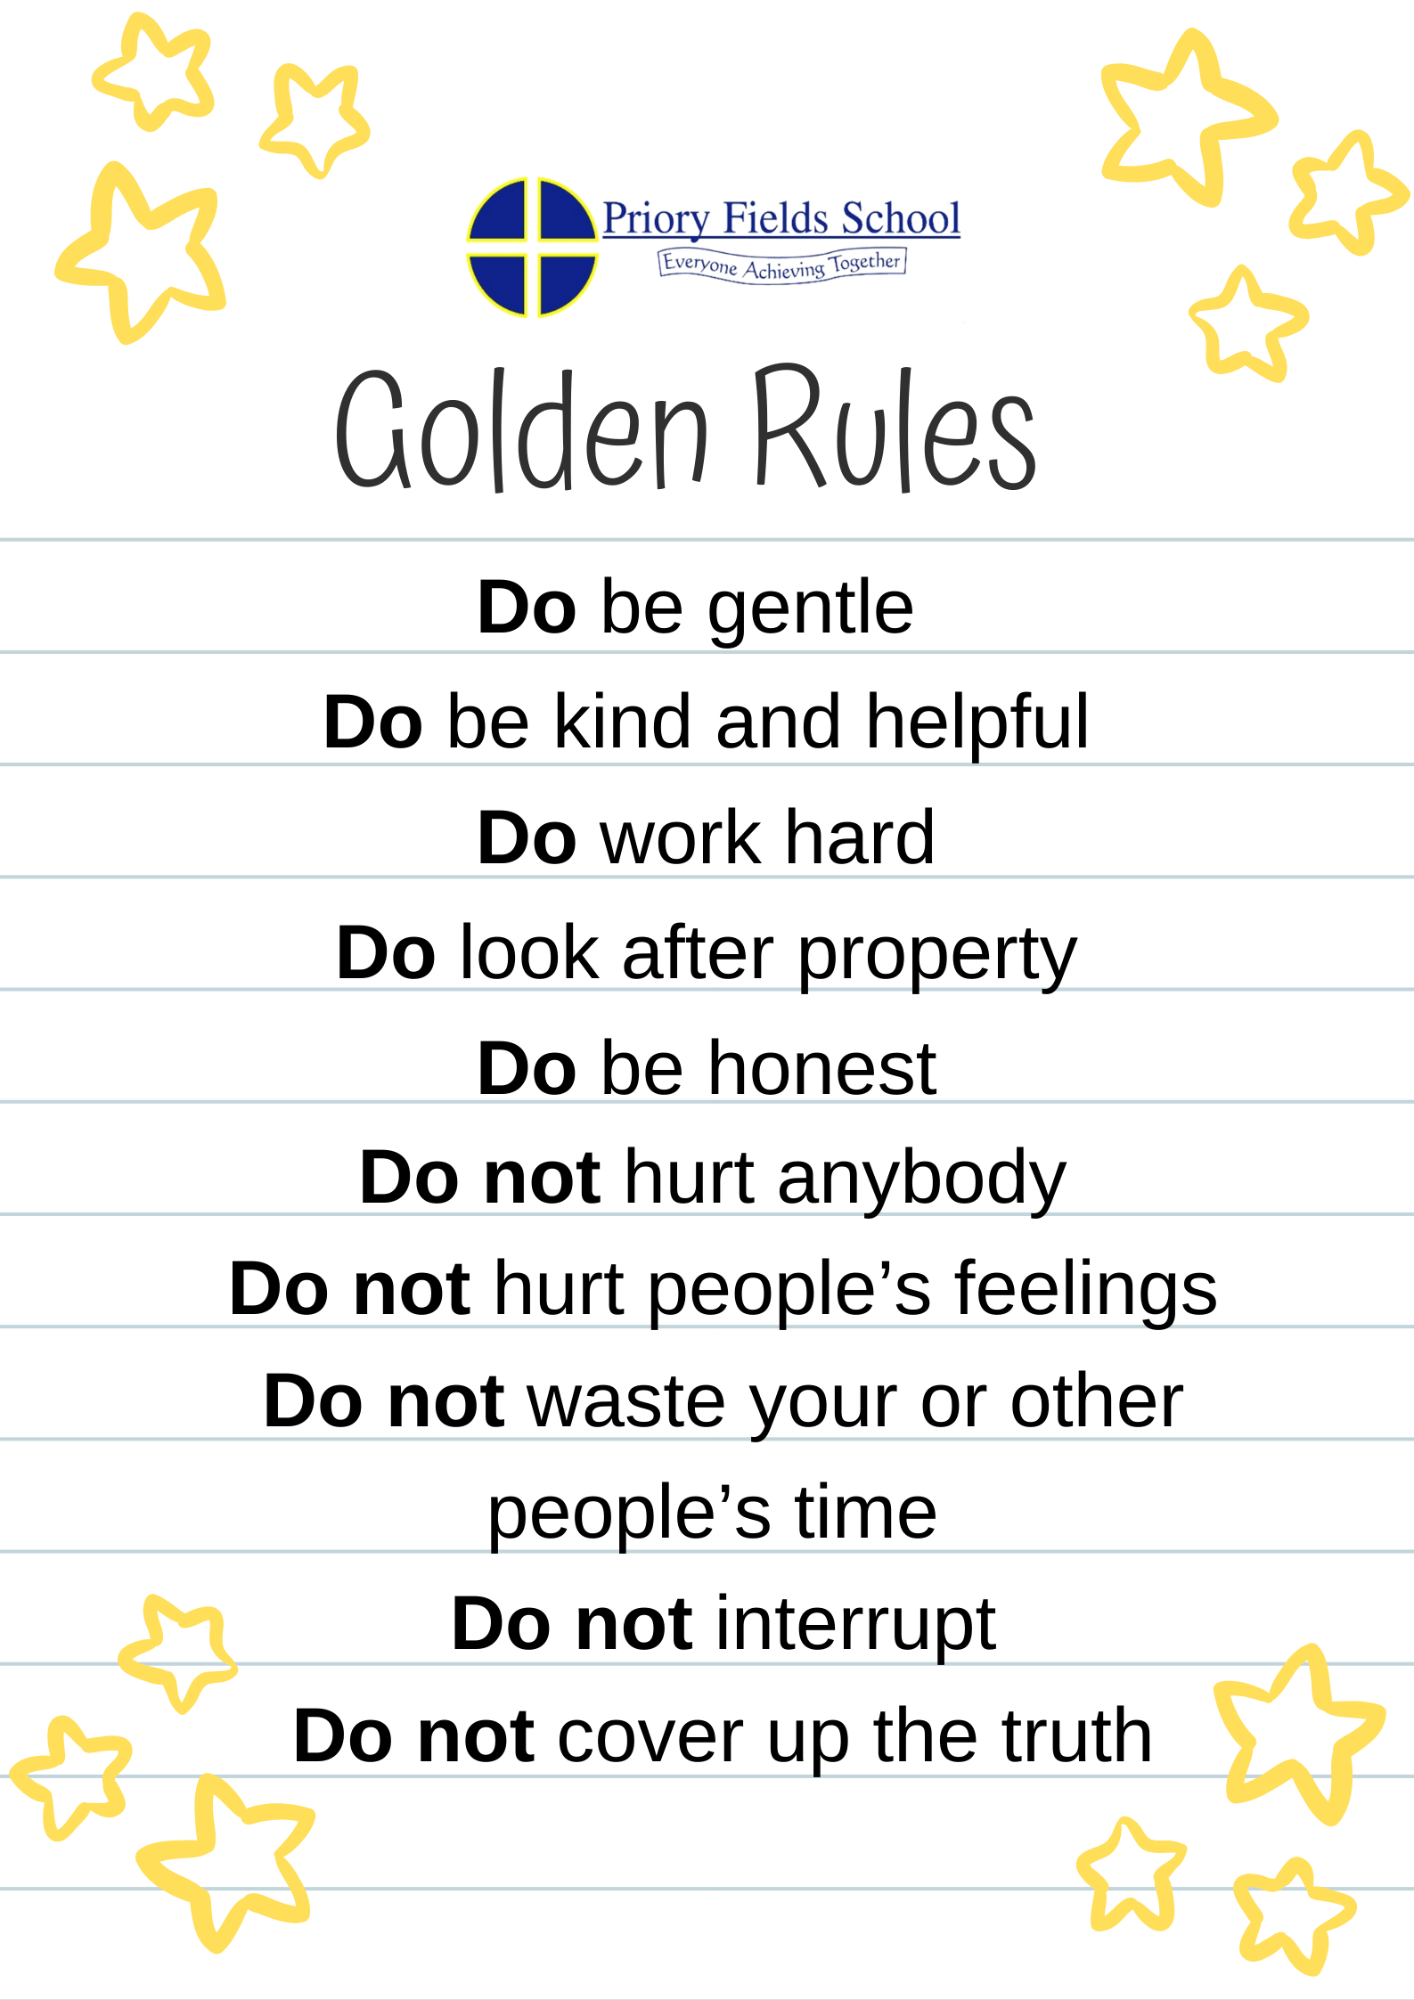 The golden rules